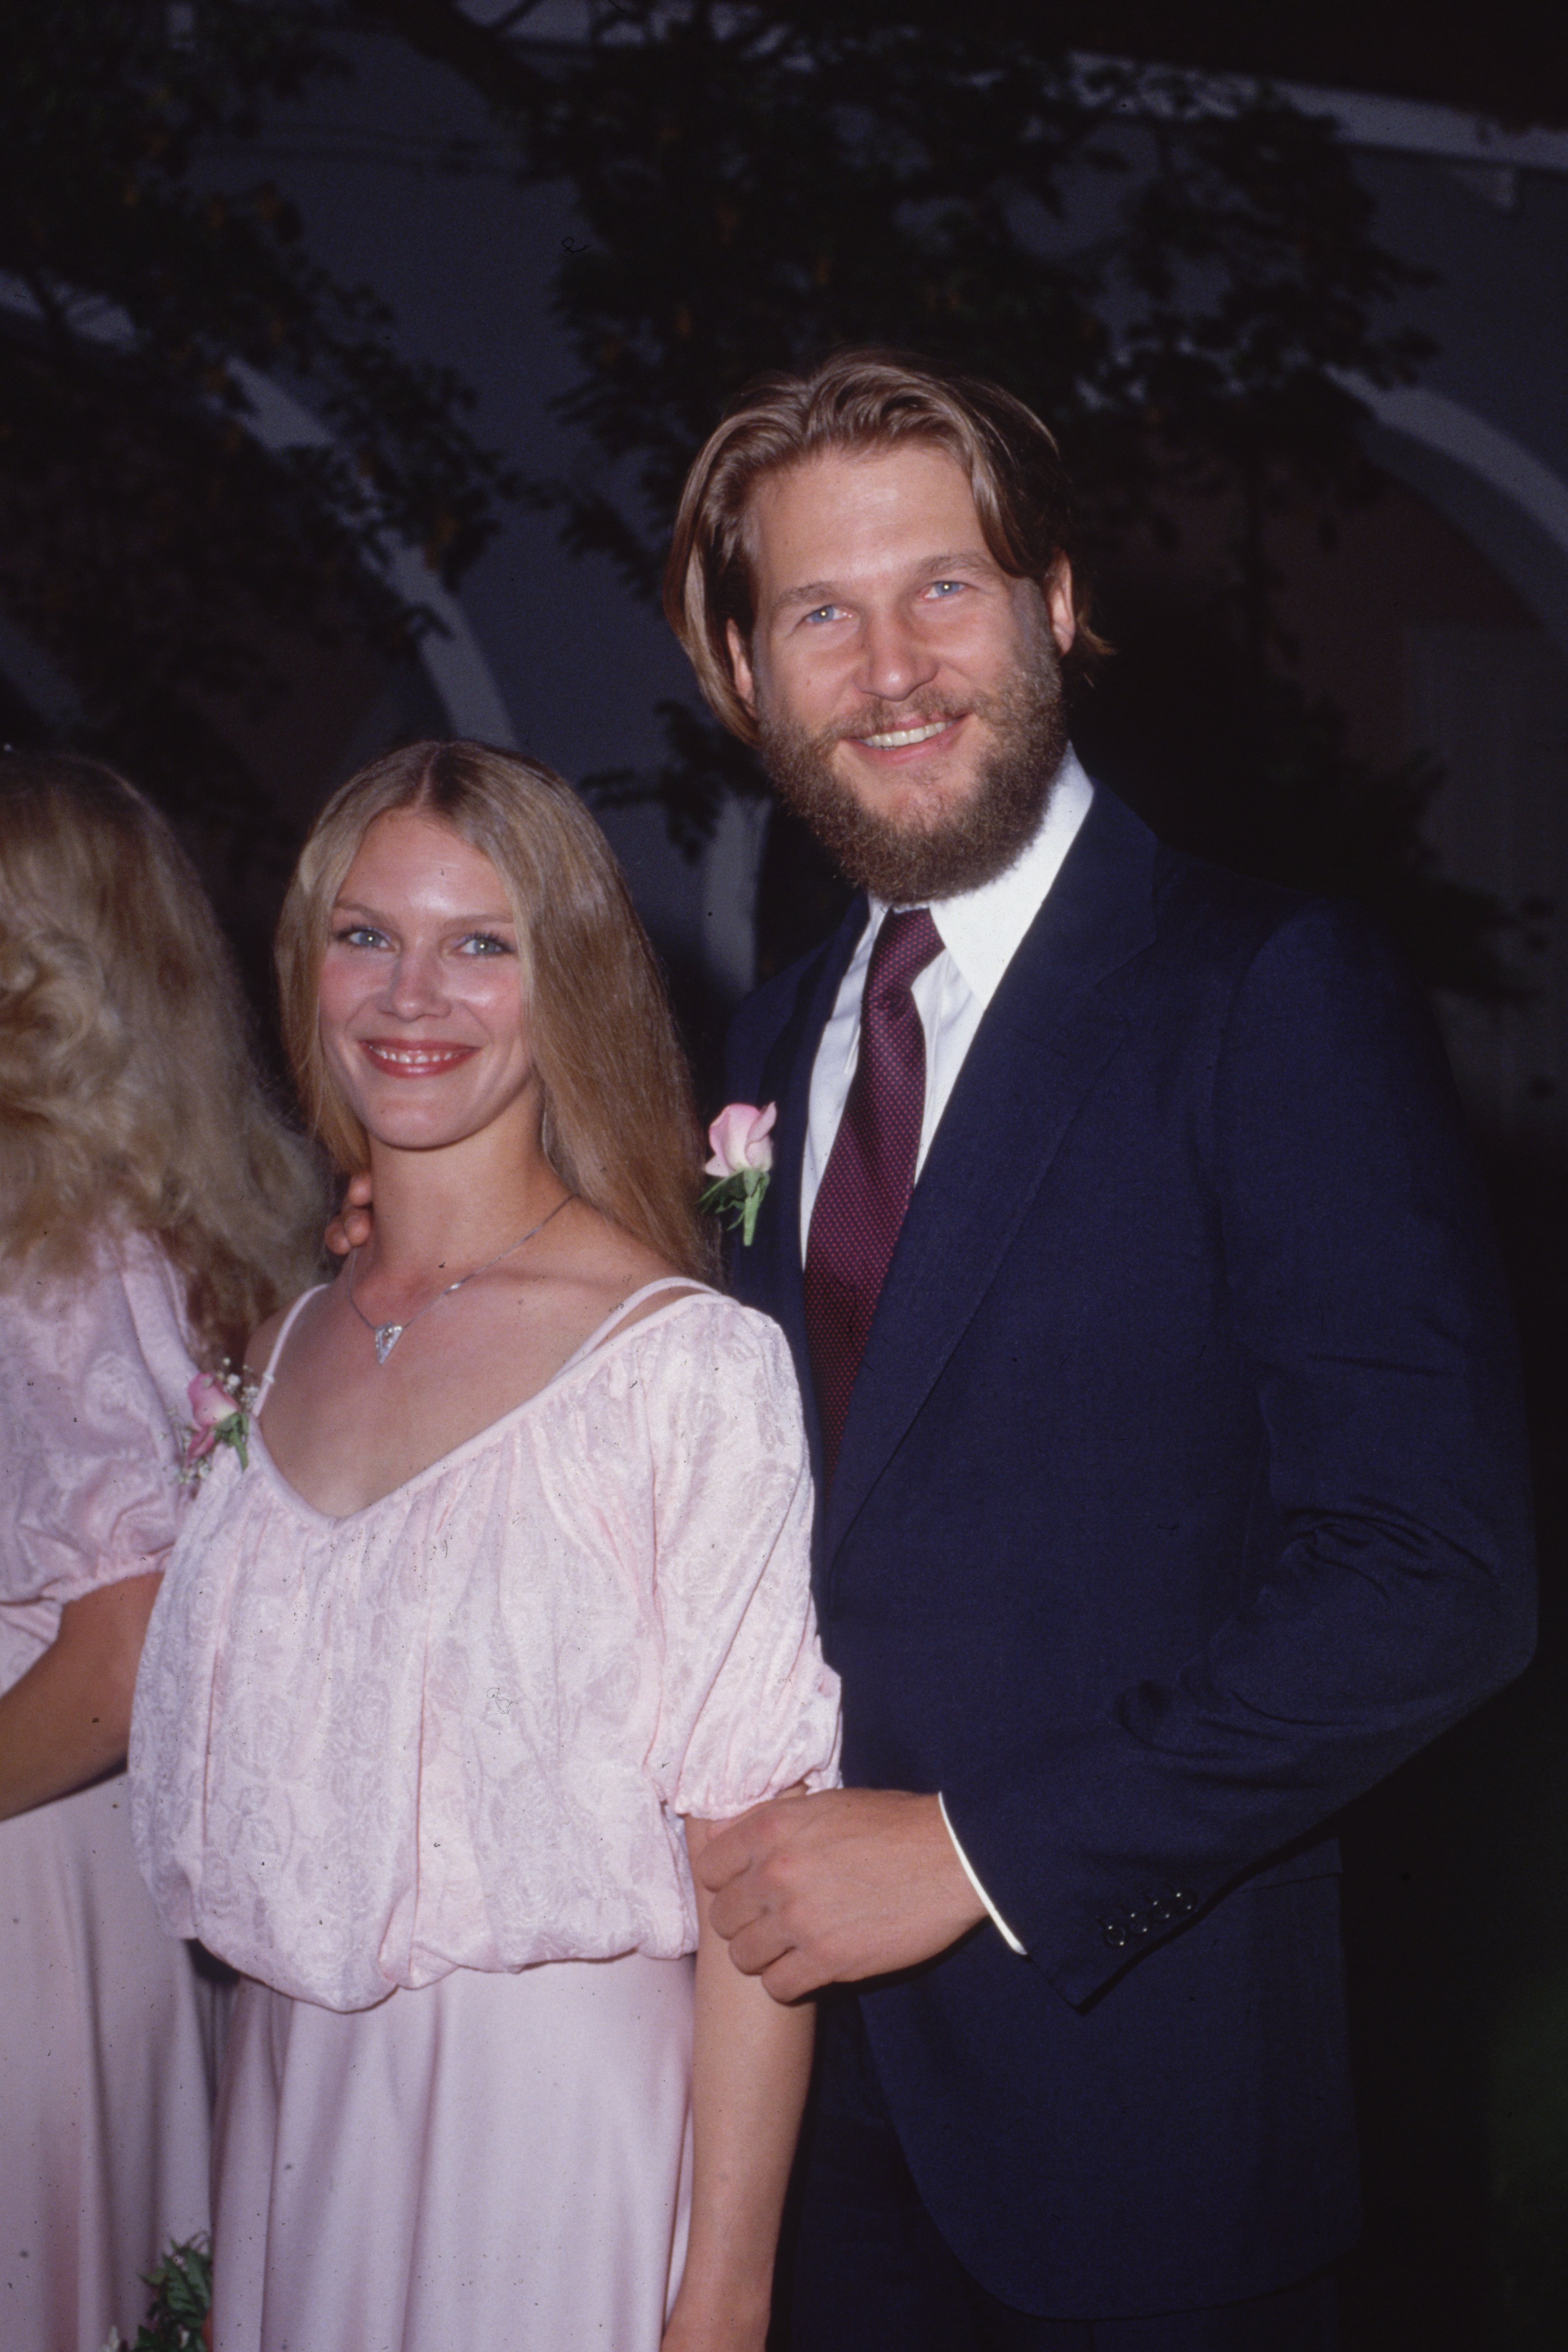 Jeff Bridges and his wife, Susan Geston, smiling while at a formal event circa 1978 | Source: Getty Images 